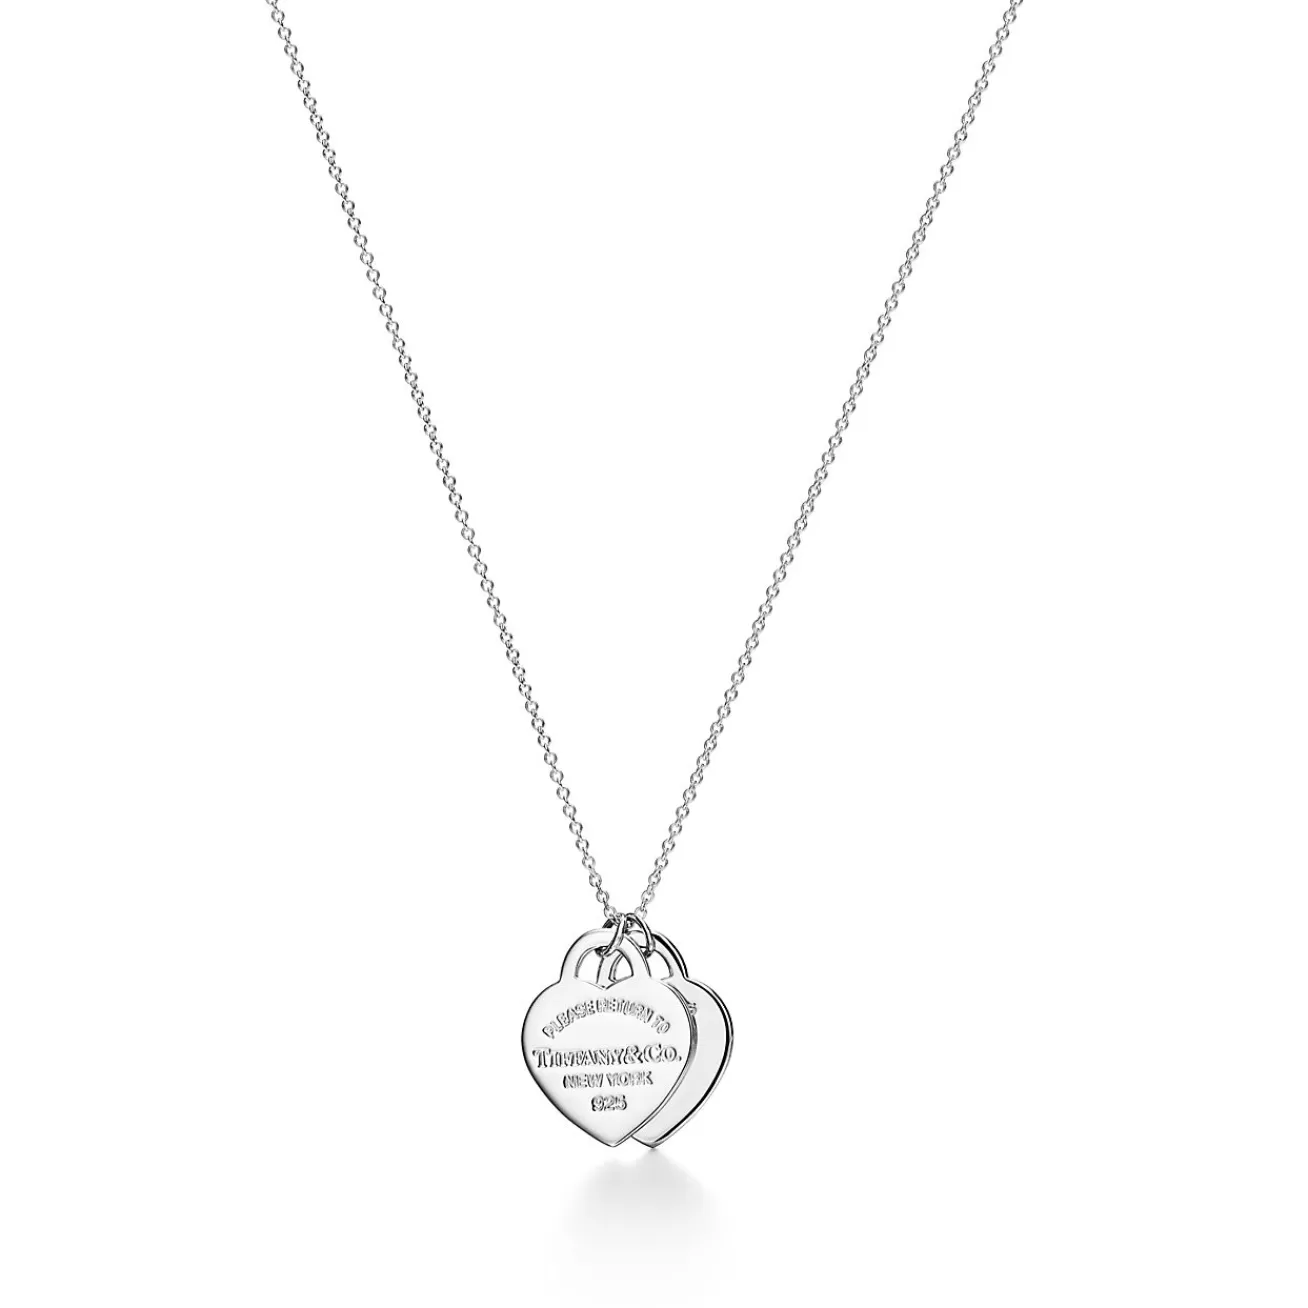 Tiffany & Co. Return to Tiffany® Blue Double Heart Tag Pendant in Silver with a Diamond, Small | ^ Necklaces & Pendants | Gifts for Her